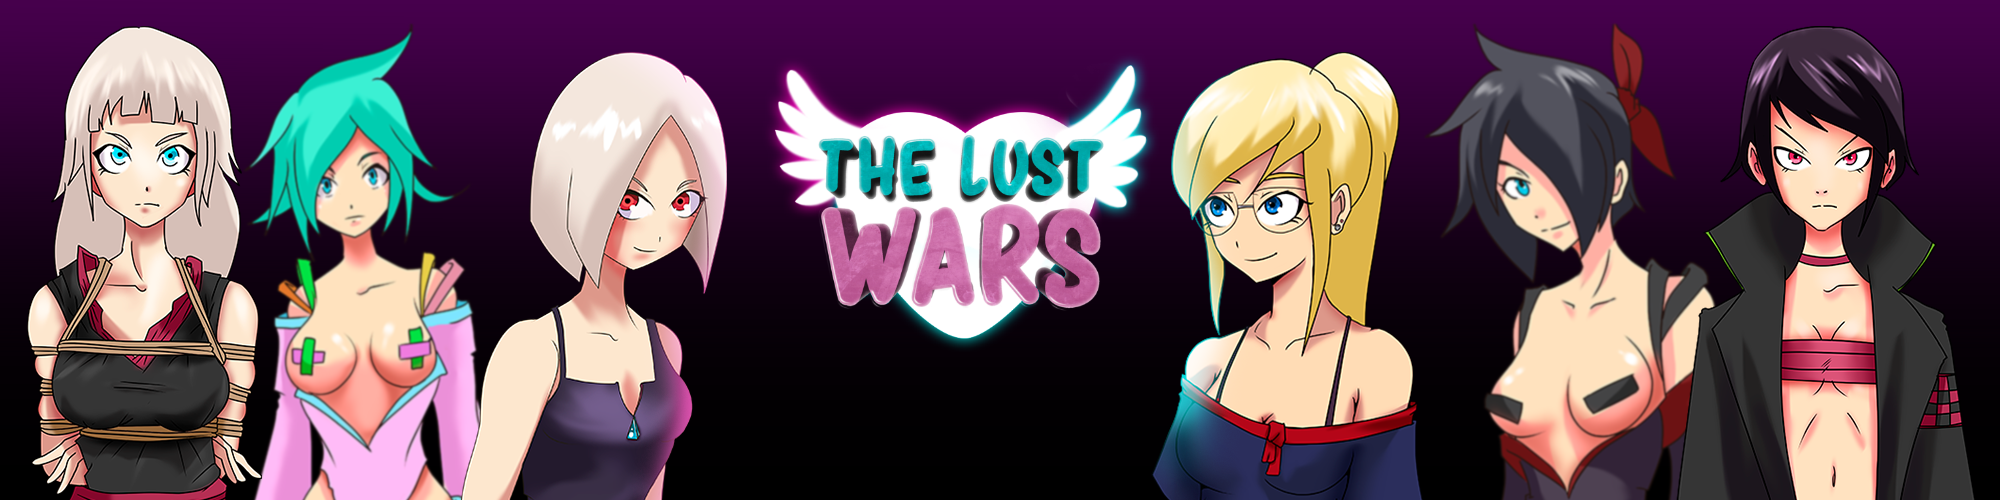 The Lust Wars: Colosseum (NSFW)